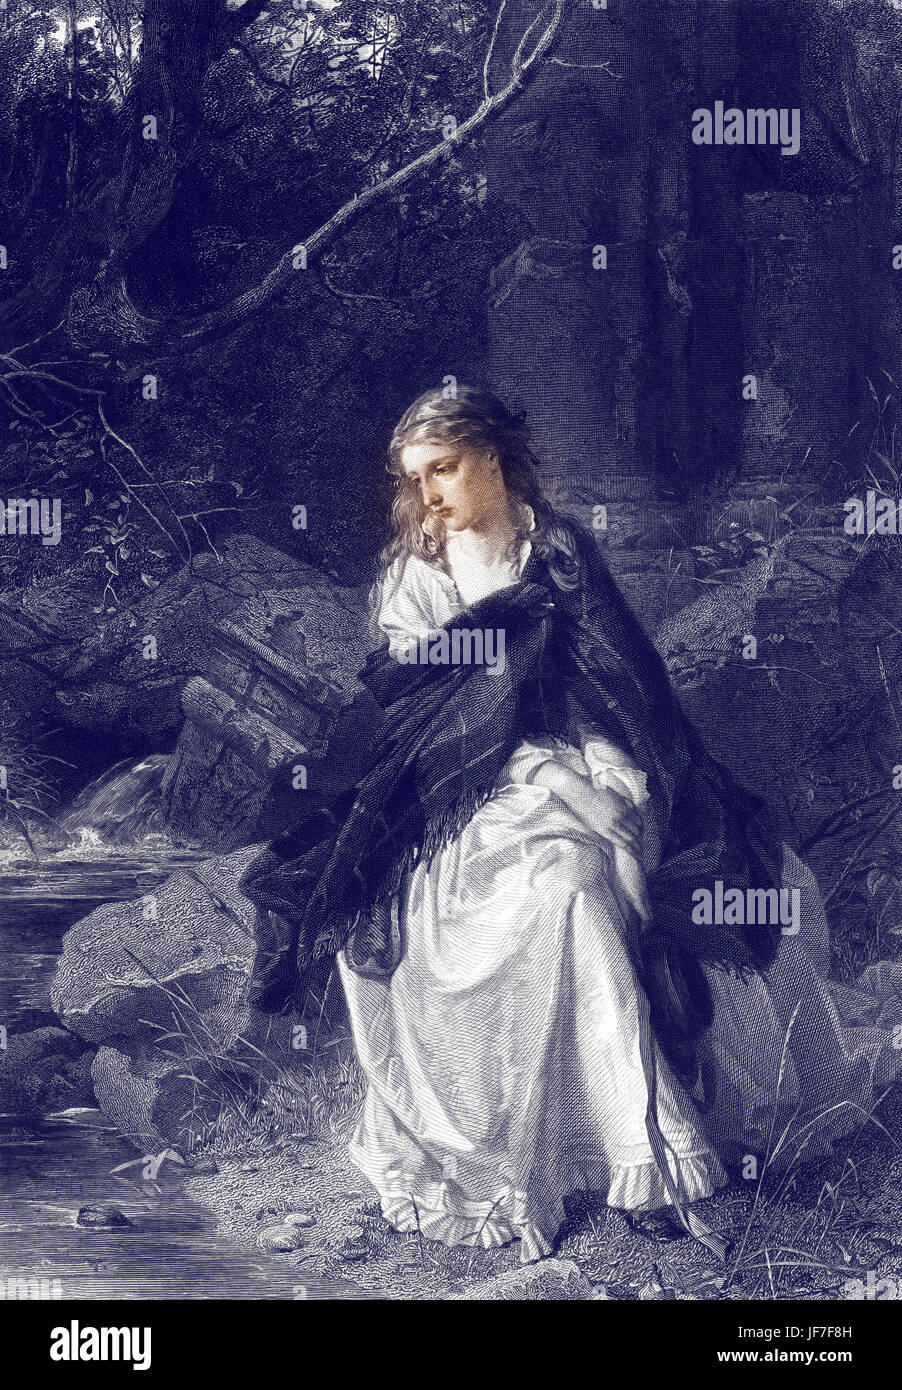 The Bride of Lammermoor by Sir Walter Scott. Lucy Ashton at the fountain - Chapter XII . Engraving by Robert Anderson based on a painting by Robert Herdman. The novel was published in 1819 and was used as the basis for Donizetti's opera Lucia di Lammermoor. Tinted version. Stock Photo